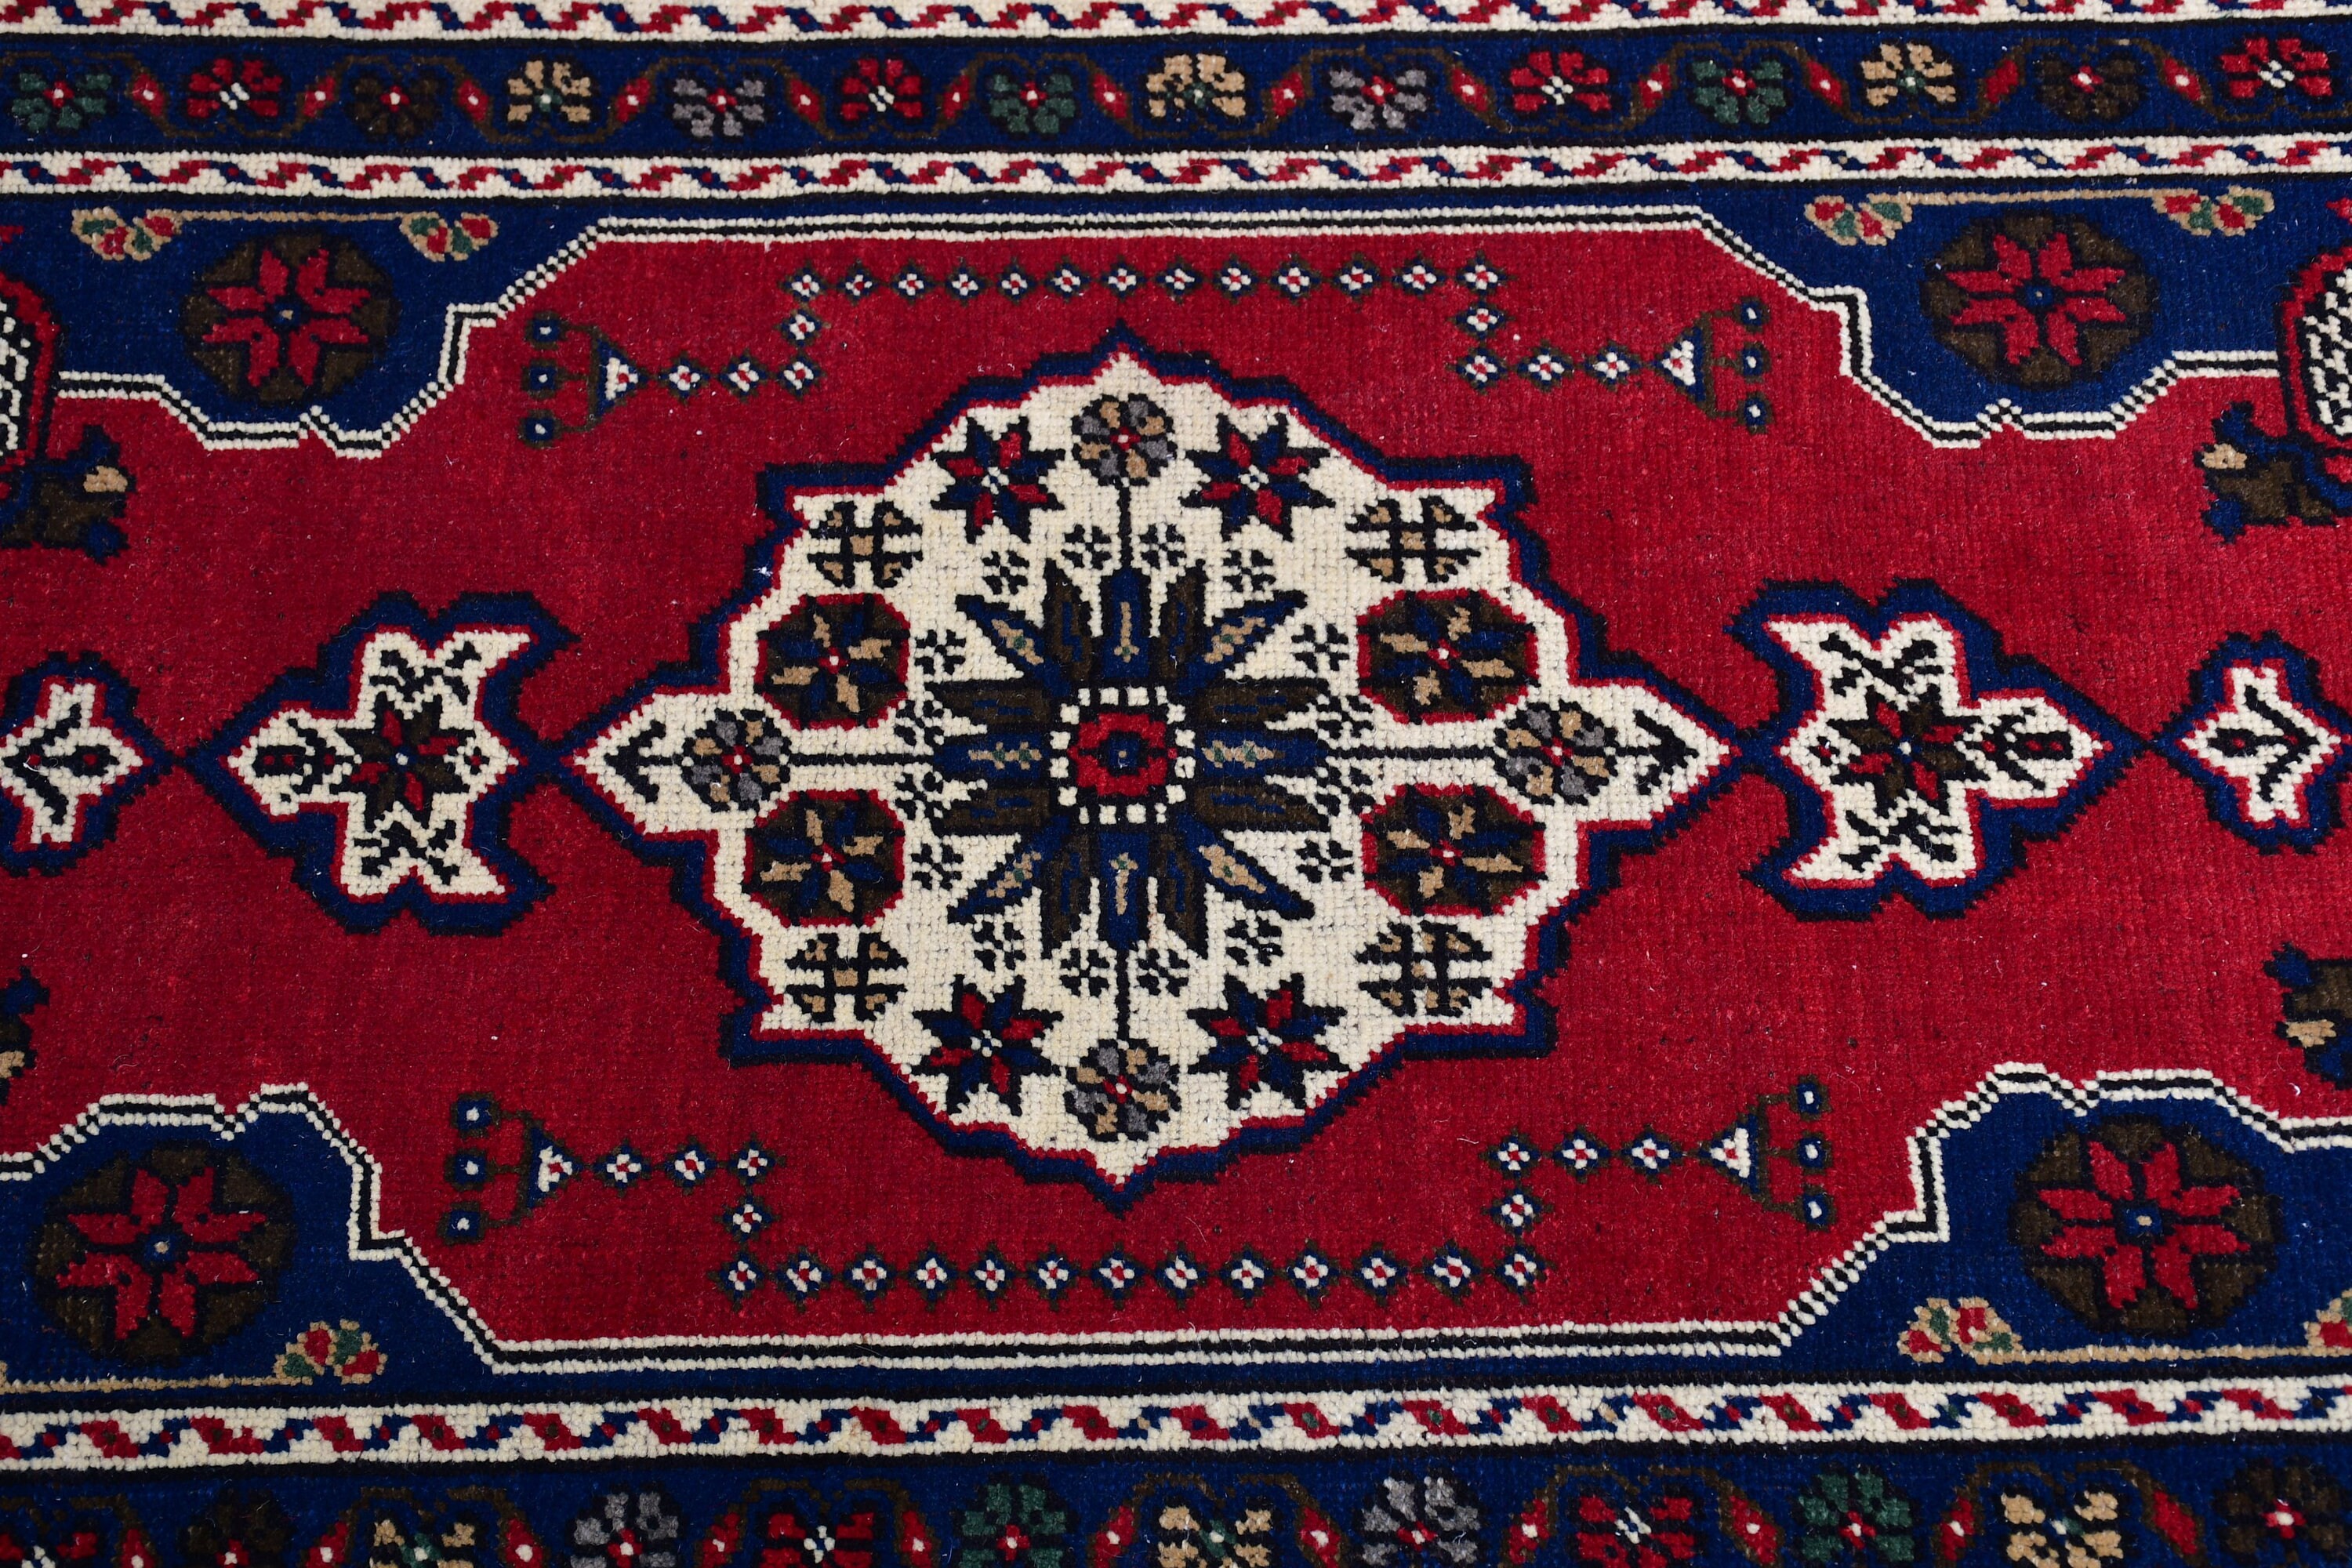 Wall Hanging Rugs, Anatolian Rugs, Nomadic Rugs, Antique Rug, Car Mat Rug, Rugs for Nursery, Turkish Rugs, 2x3.7 ft Small Rug, Vintage Rug